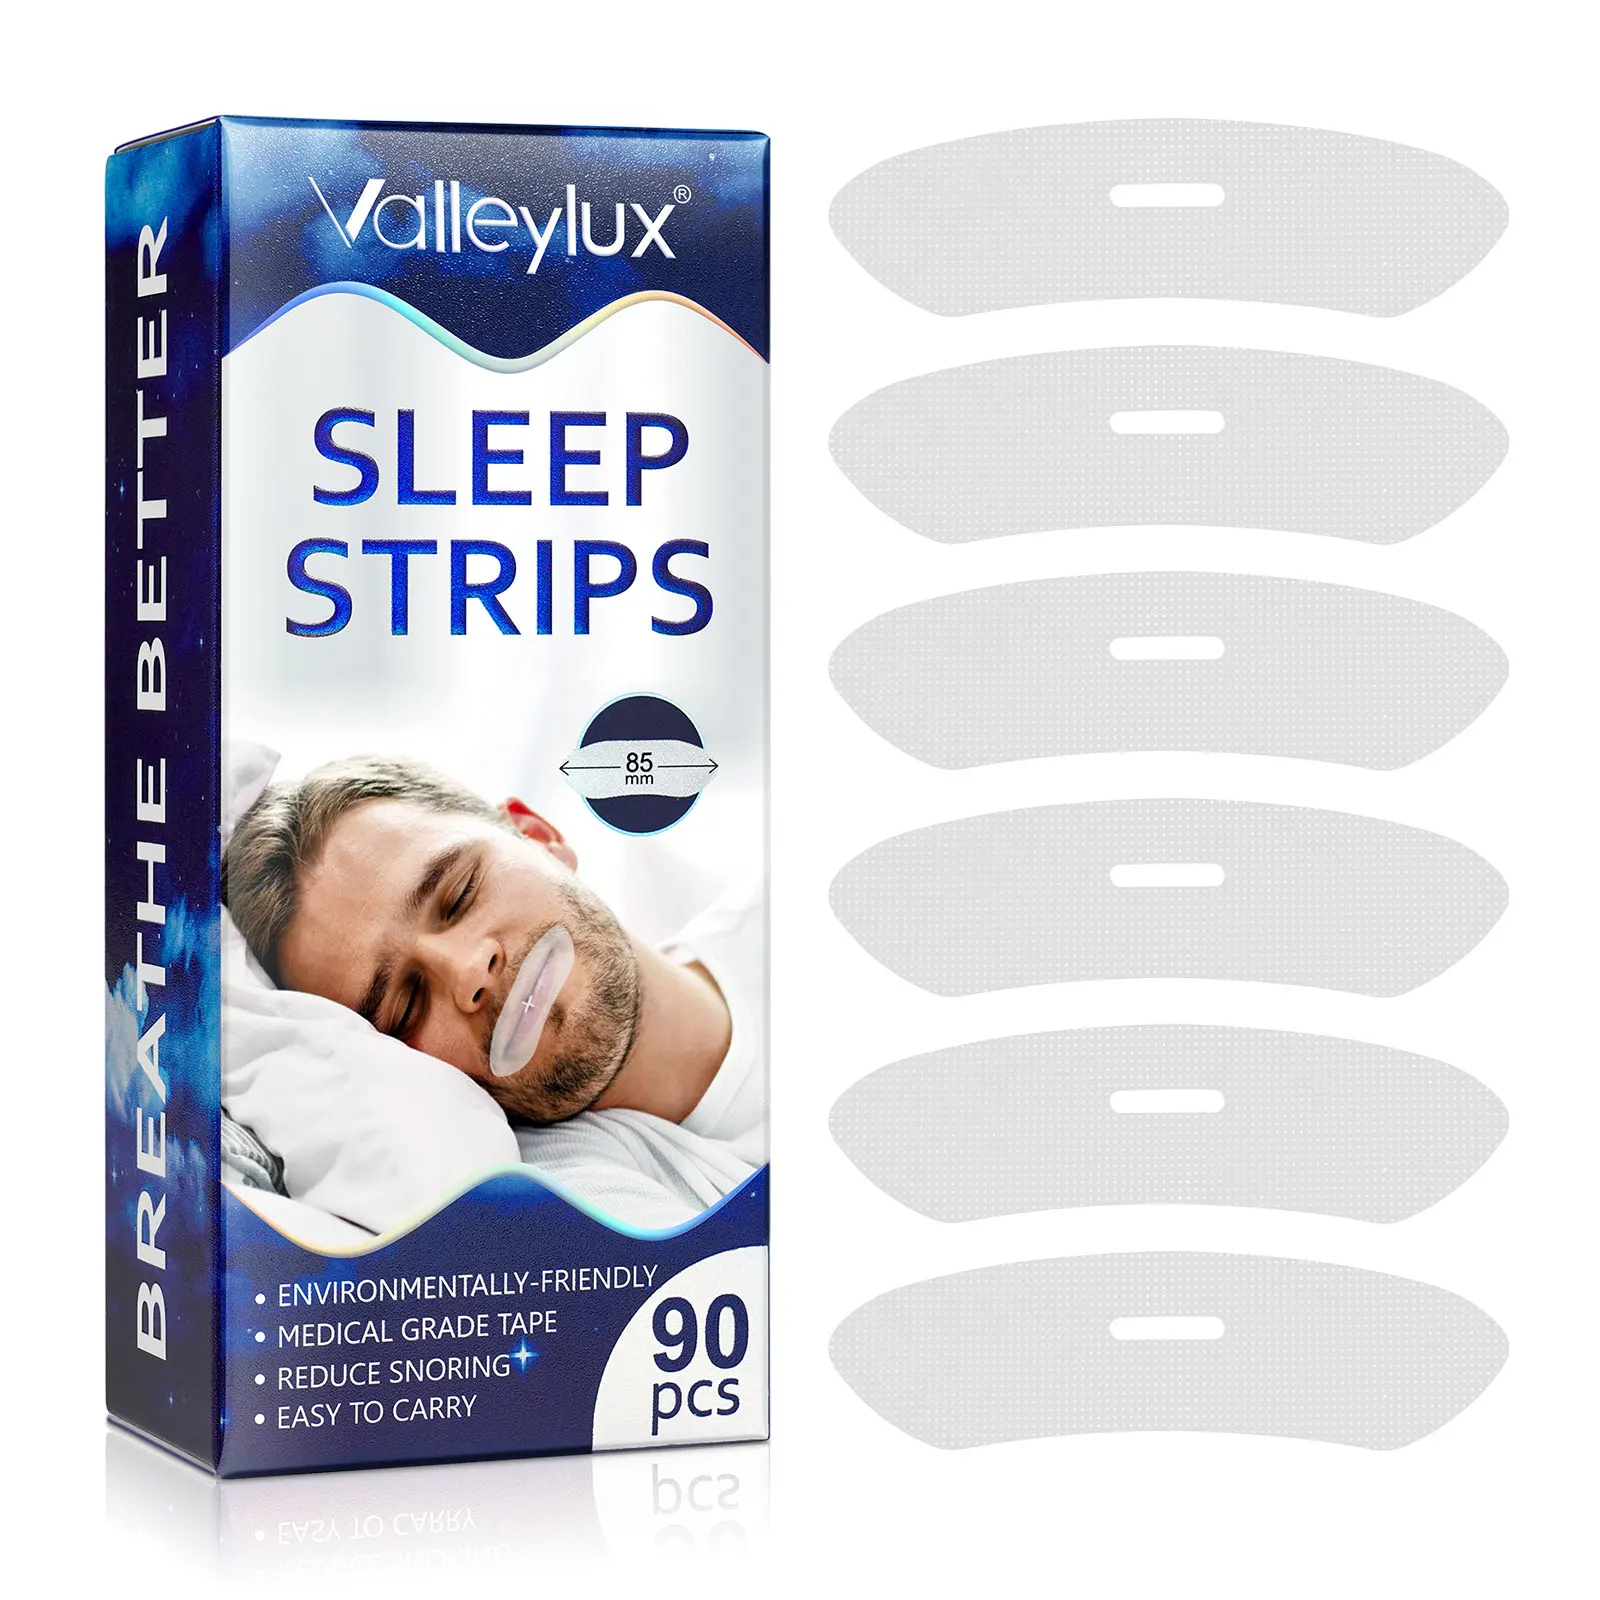 

Valleylux private label nasal breathing reliefanti snore mouth tape sleep stripsmouth tape for sleeping and reduced snoring